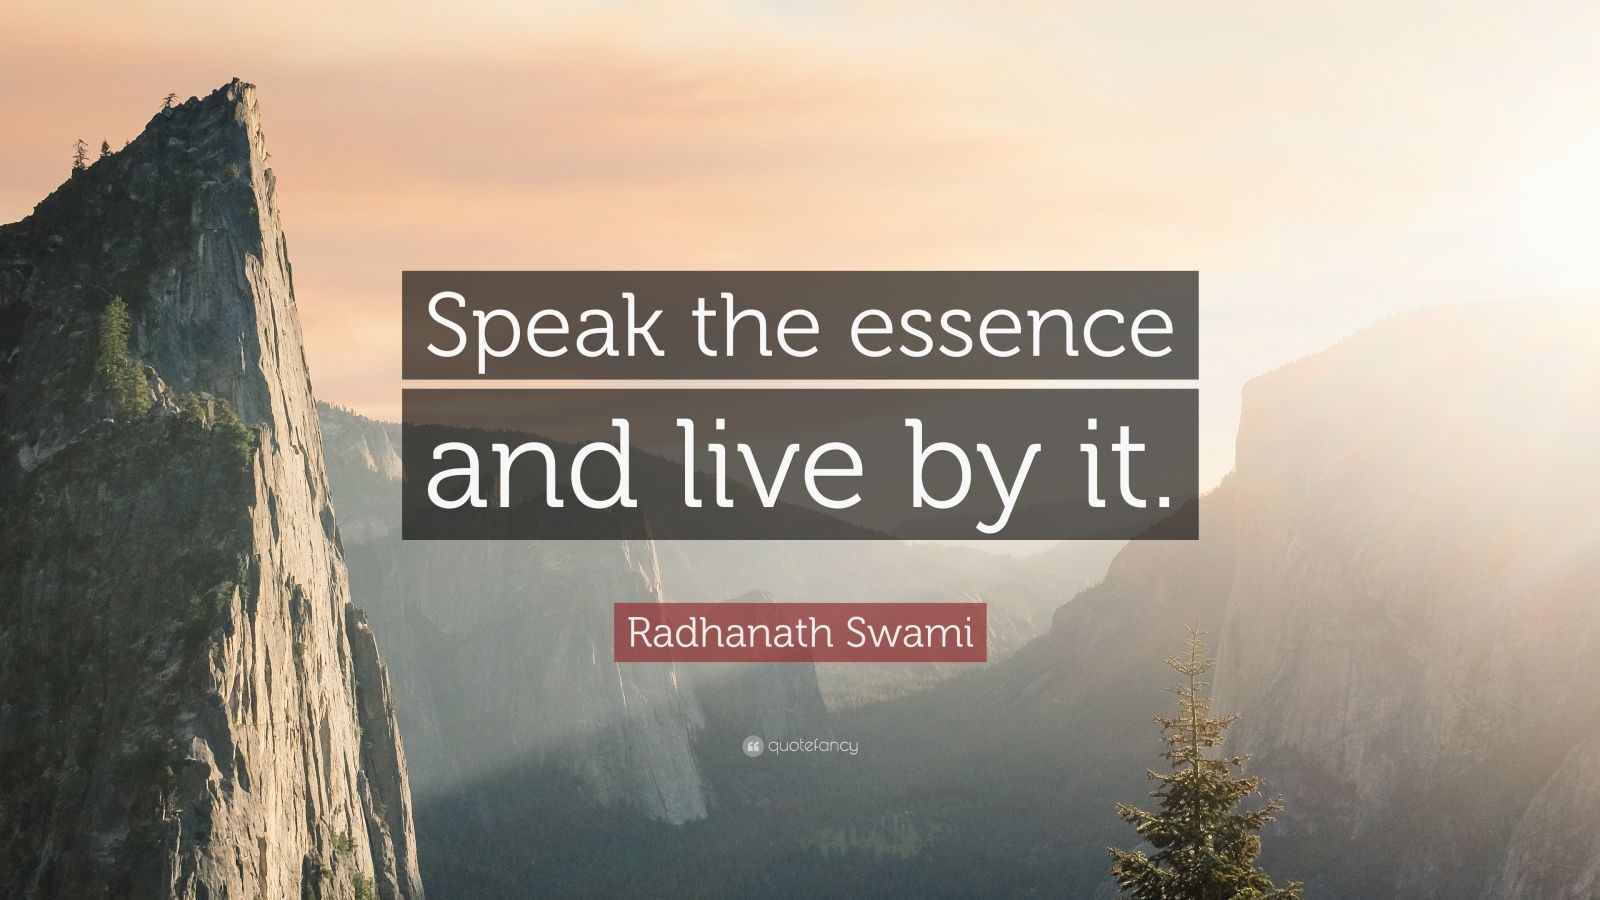 Top 180 Radhanath Swami Quotes of All Time (2021 Update) - Quotefancy